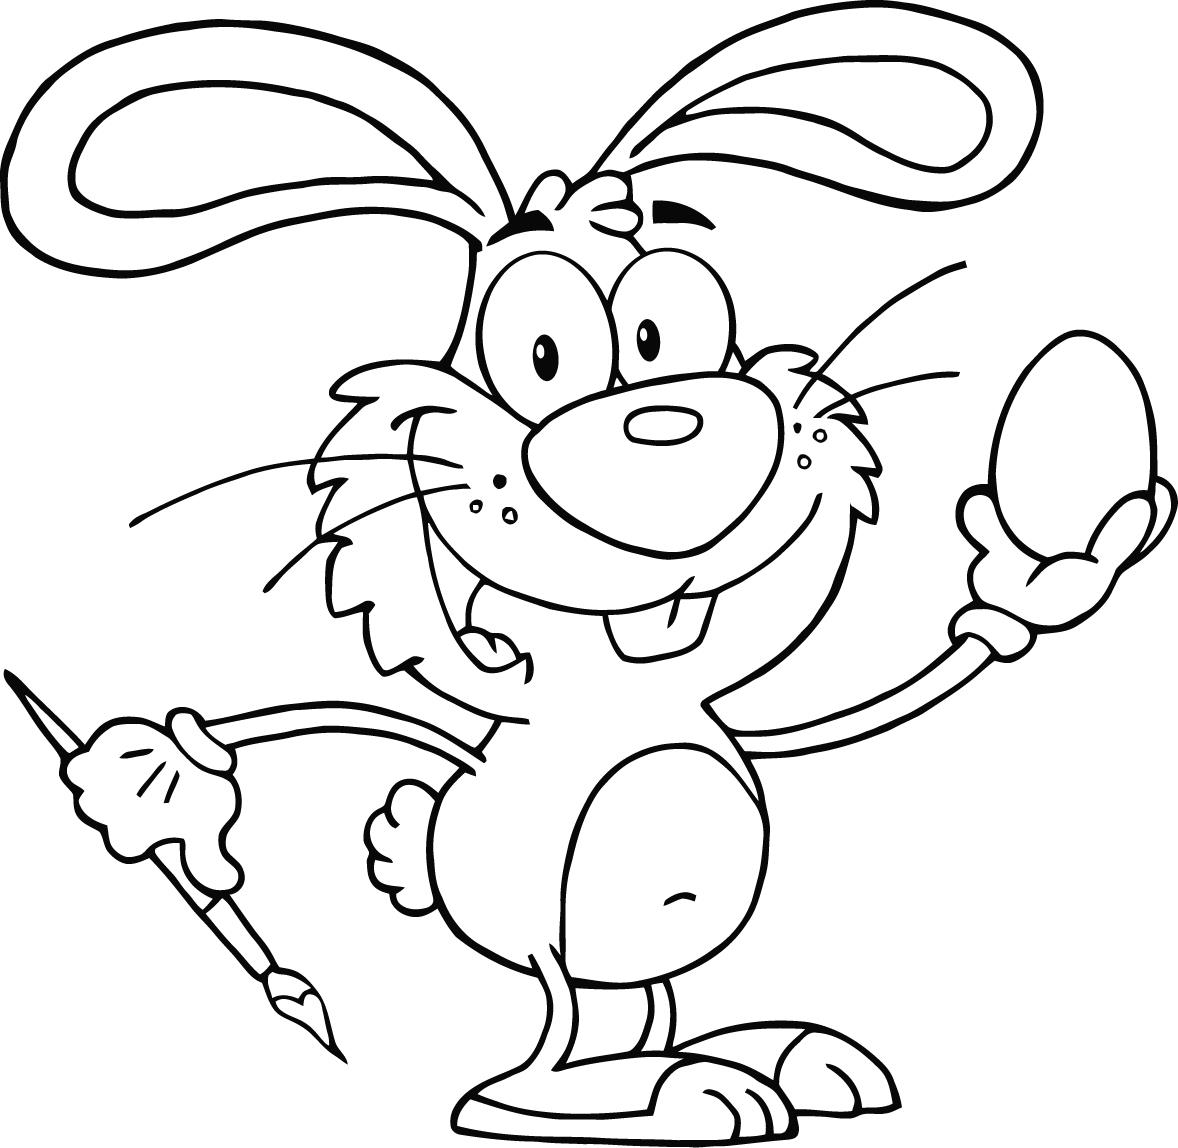 Bunny Coloring Pages Best Coloring Pages For Kids HD Wallpapers Download Free Images Wallpaper [wallpaper896.blogspot.com]